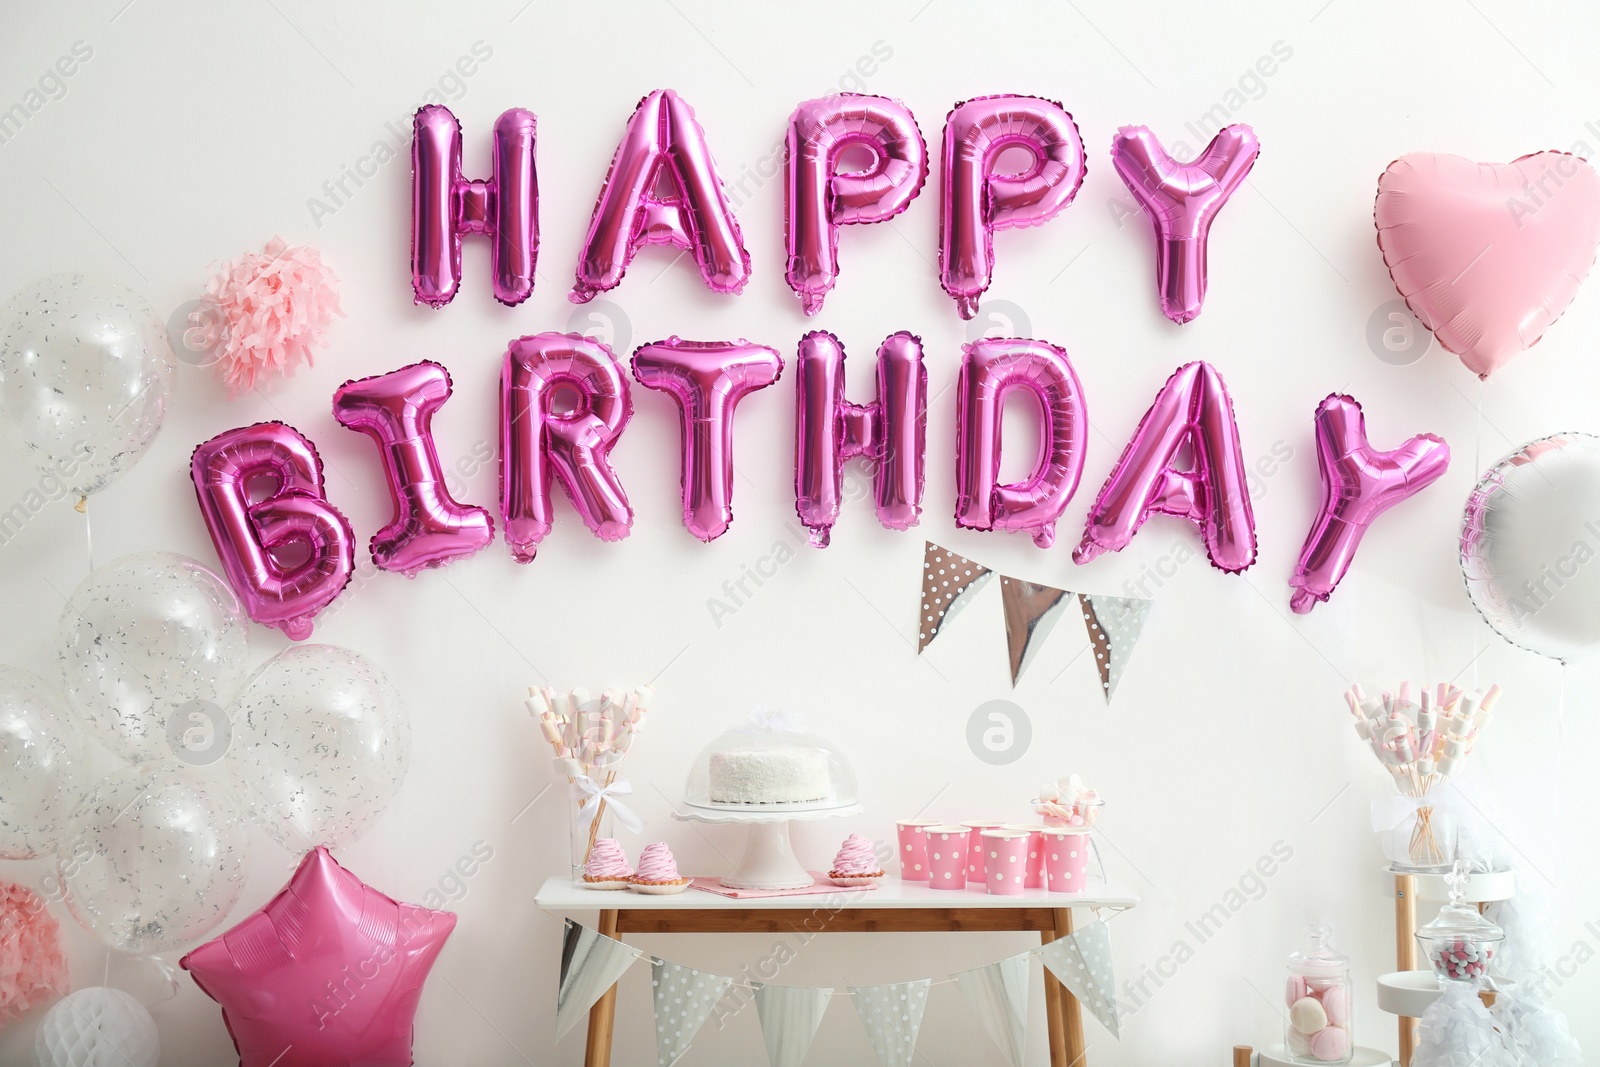 Photo of Phrase HAPPY BIRTHDAY made of pink balloon letters on white wall